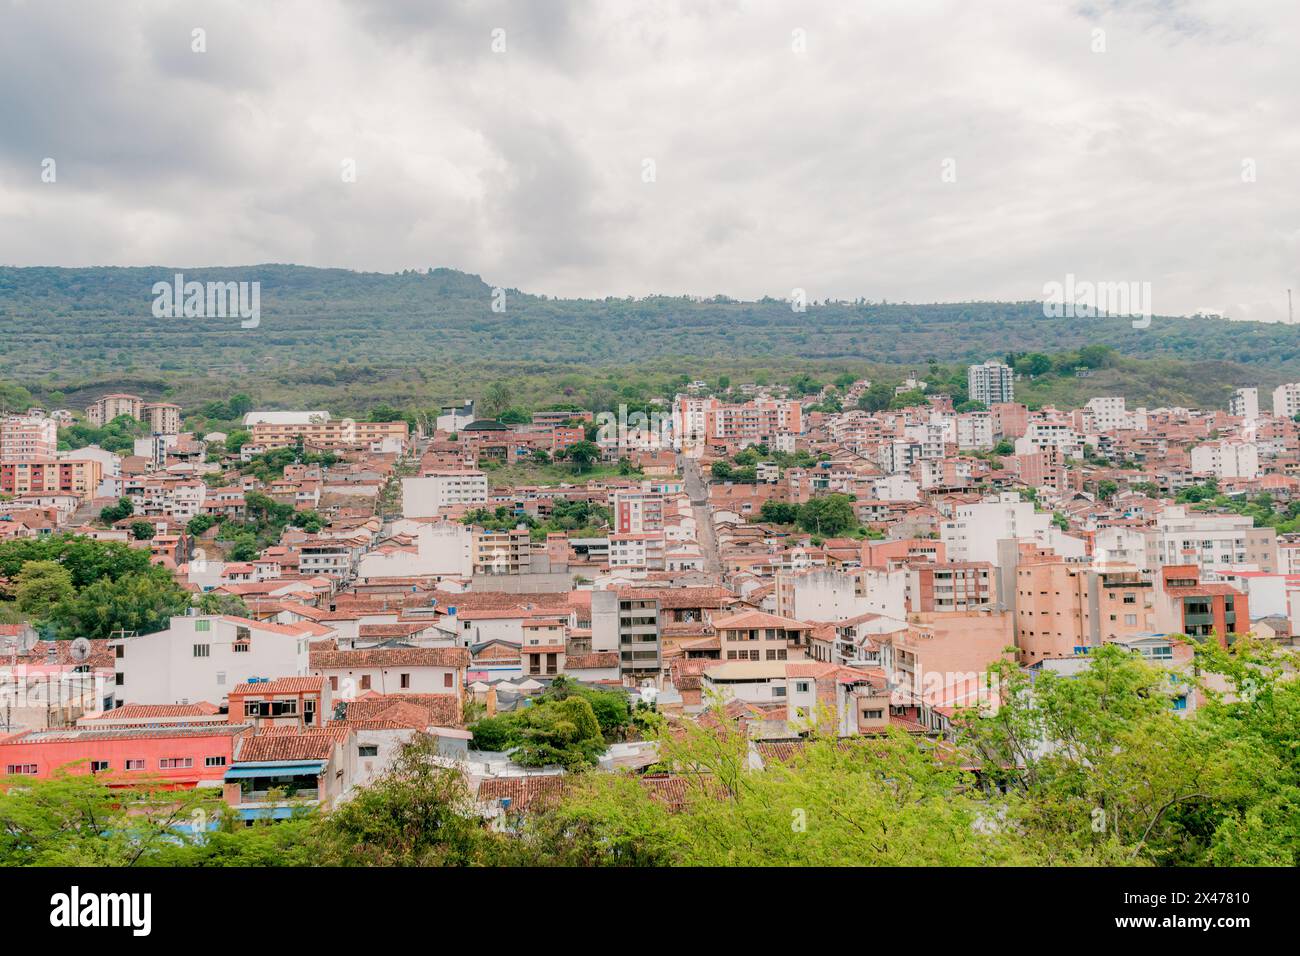 landscape of the city of San Gil, Santander, Colombia from the mountains, with green vegetation in the foreground that highlights the green surroundin Stock Photo